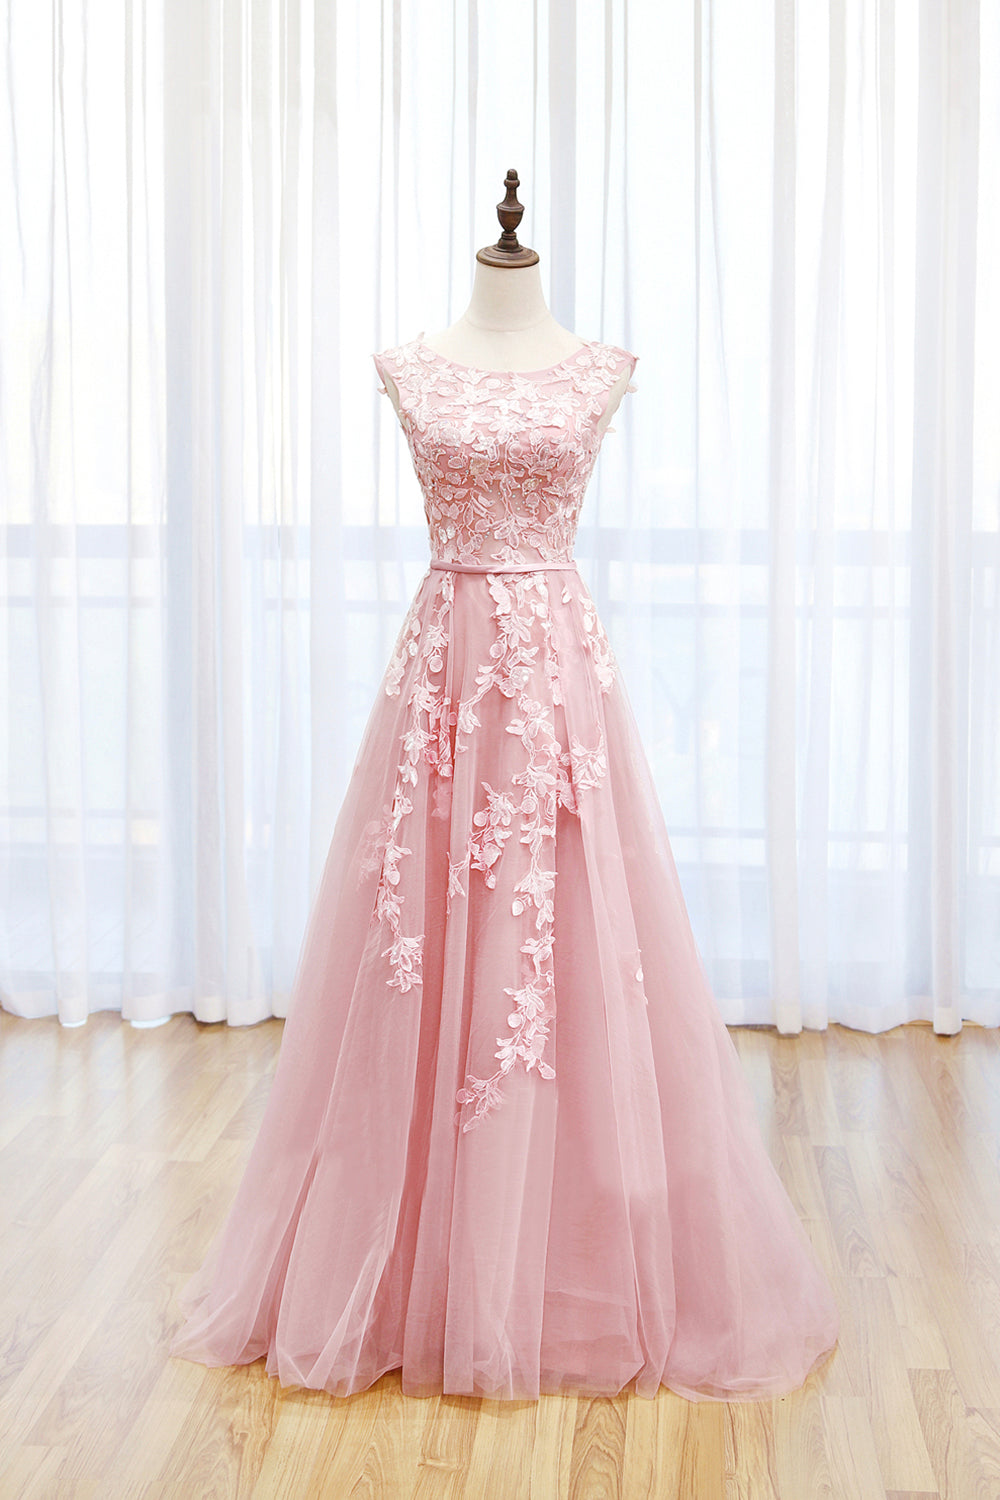 Irene | Pink Tulle Lace Long Prom Dress, Lovely A-Line Open Back Evening Dress